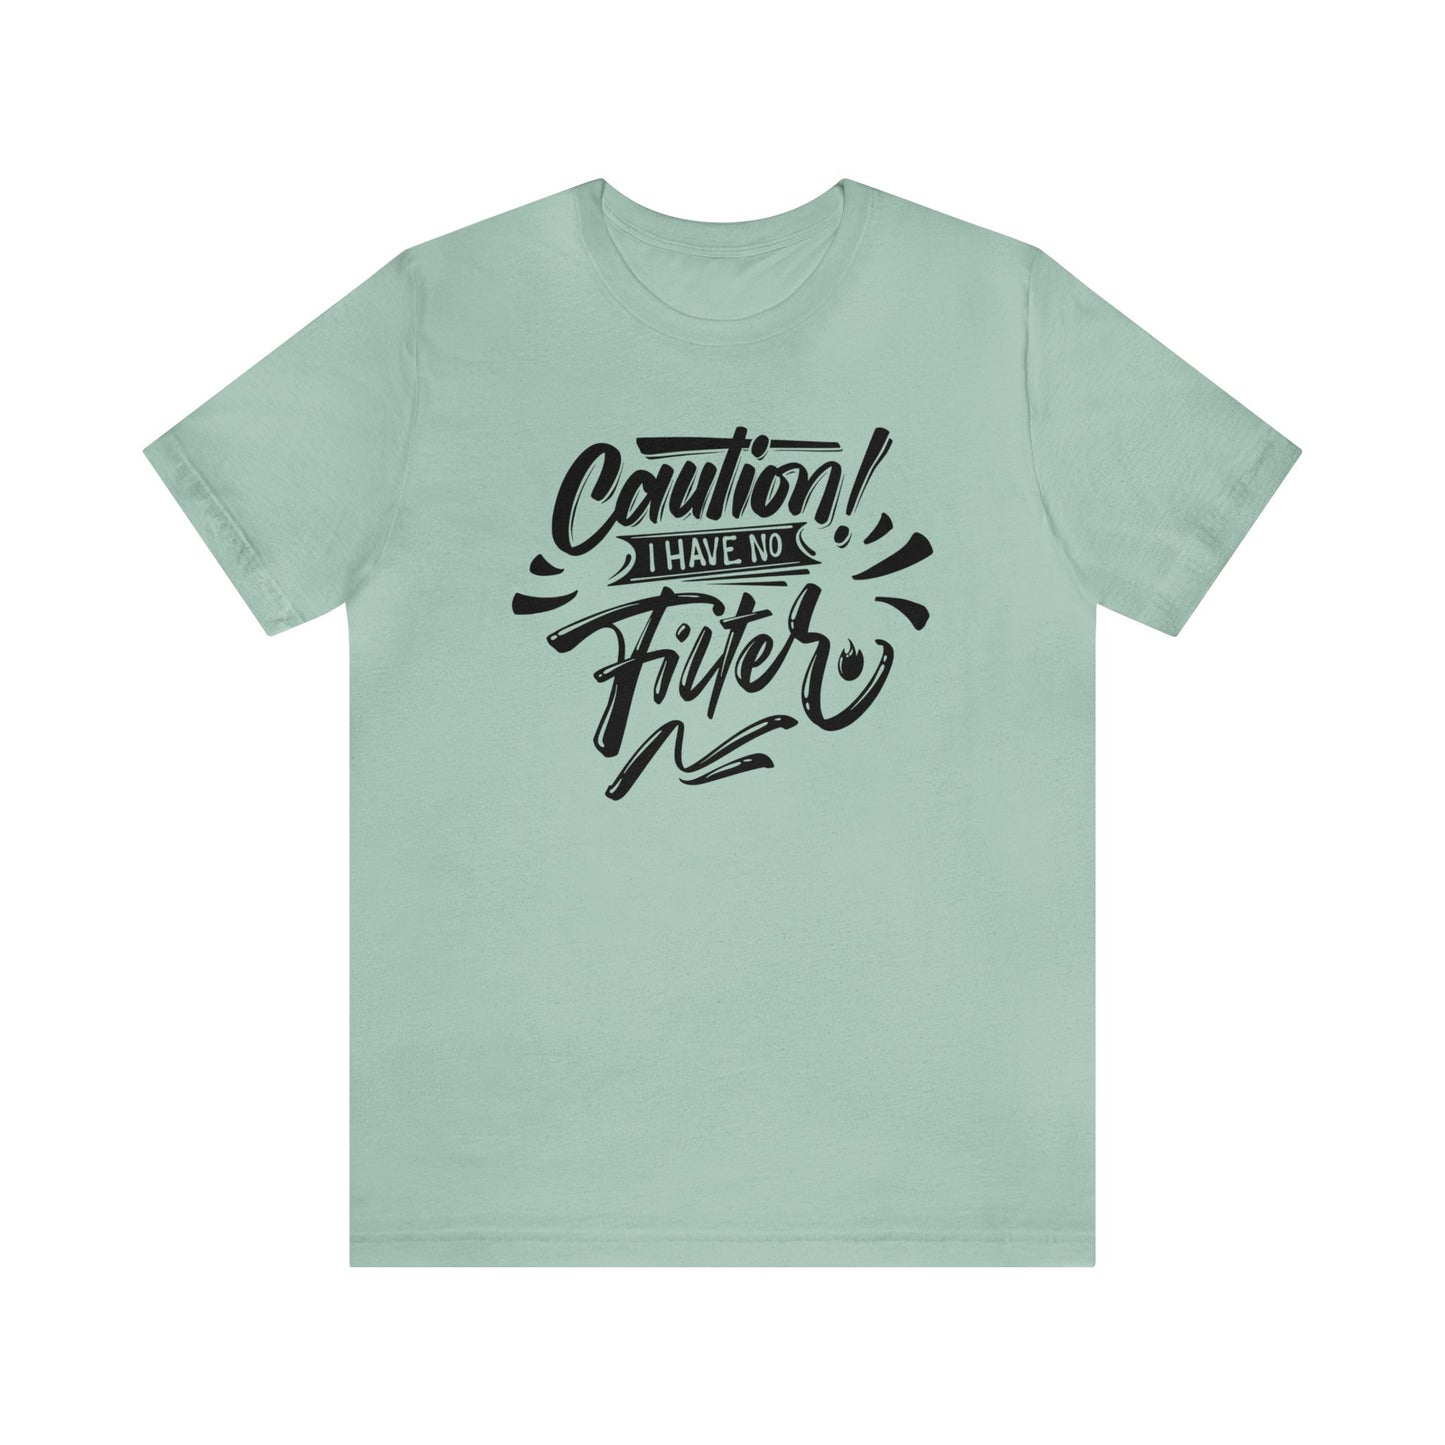 Caution T-Shirt For No Filter T Shirt For Outspoken TShirt